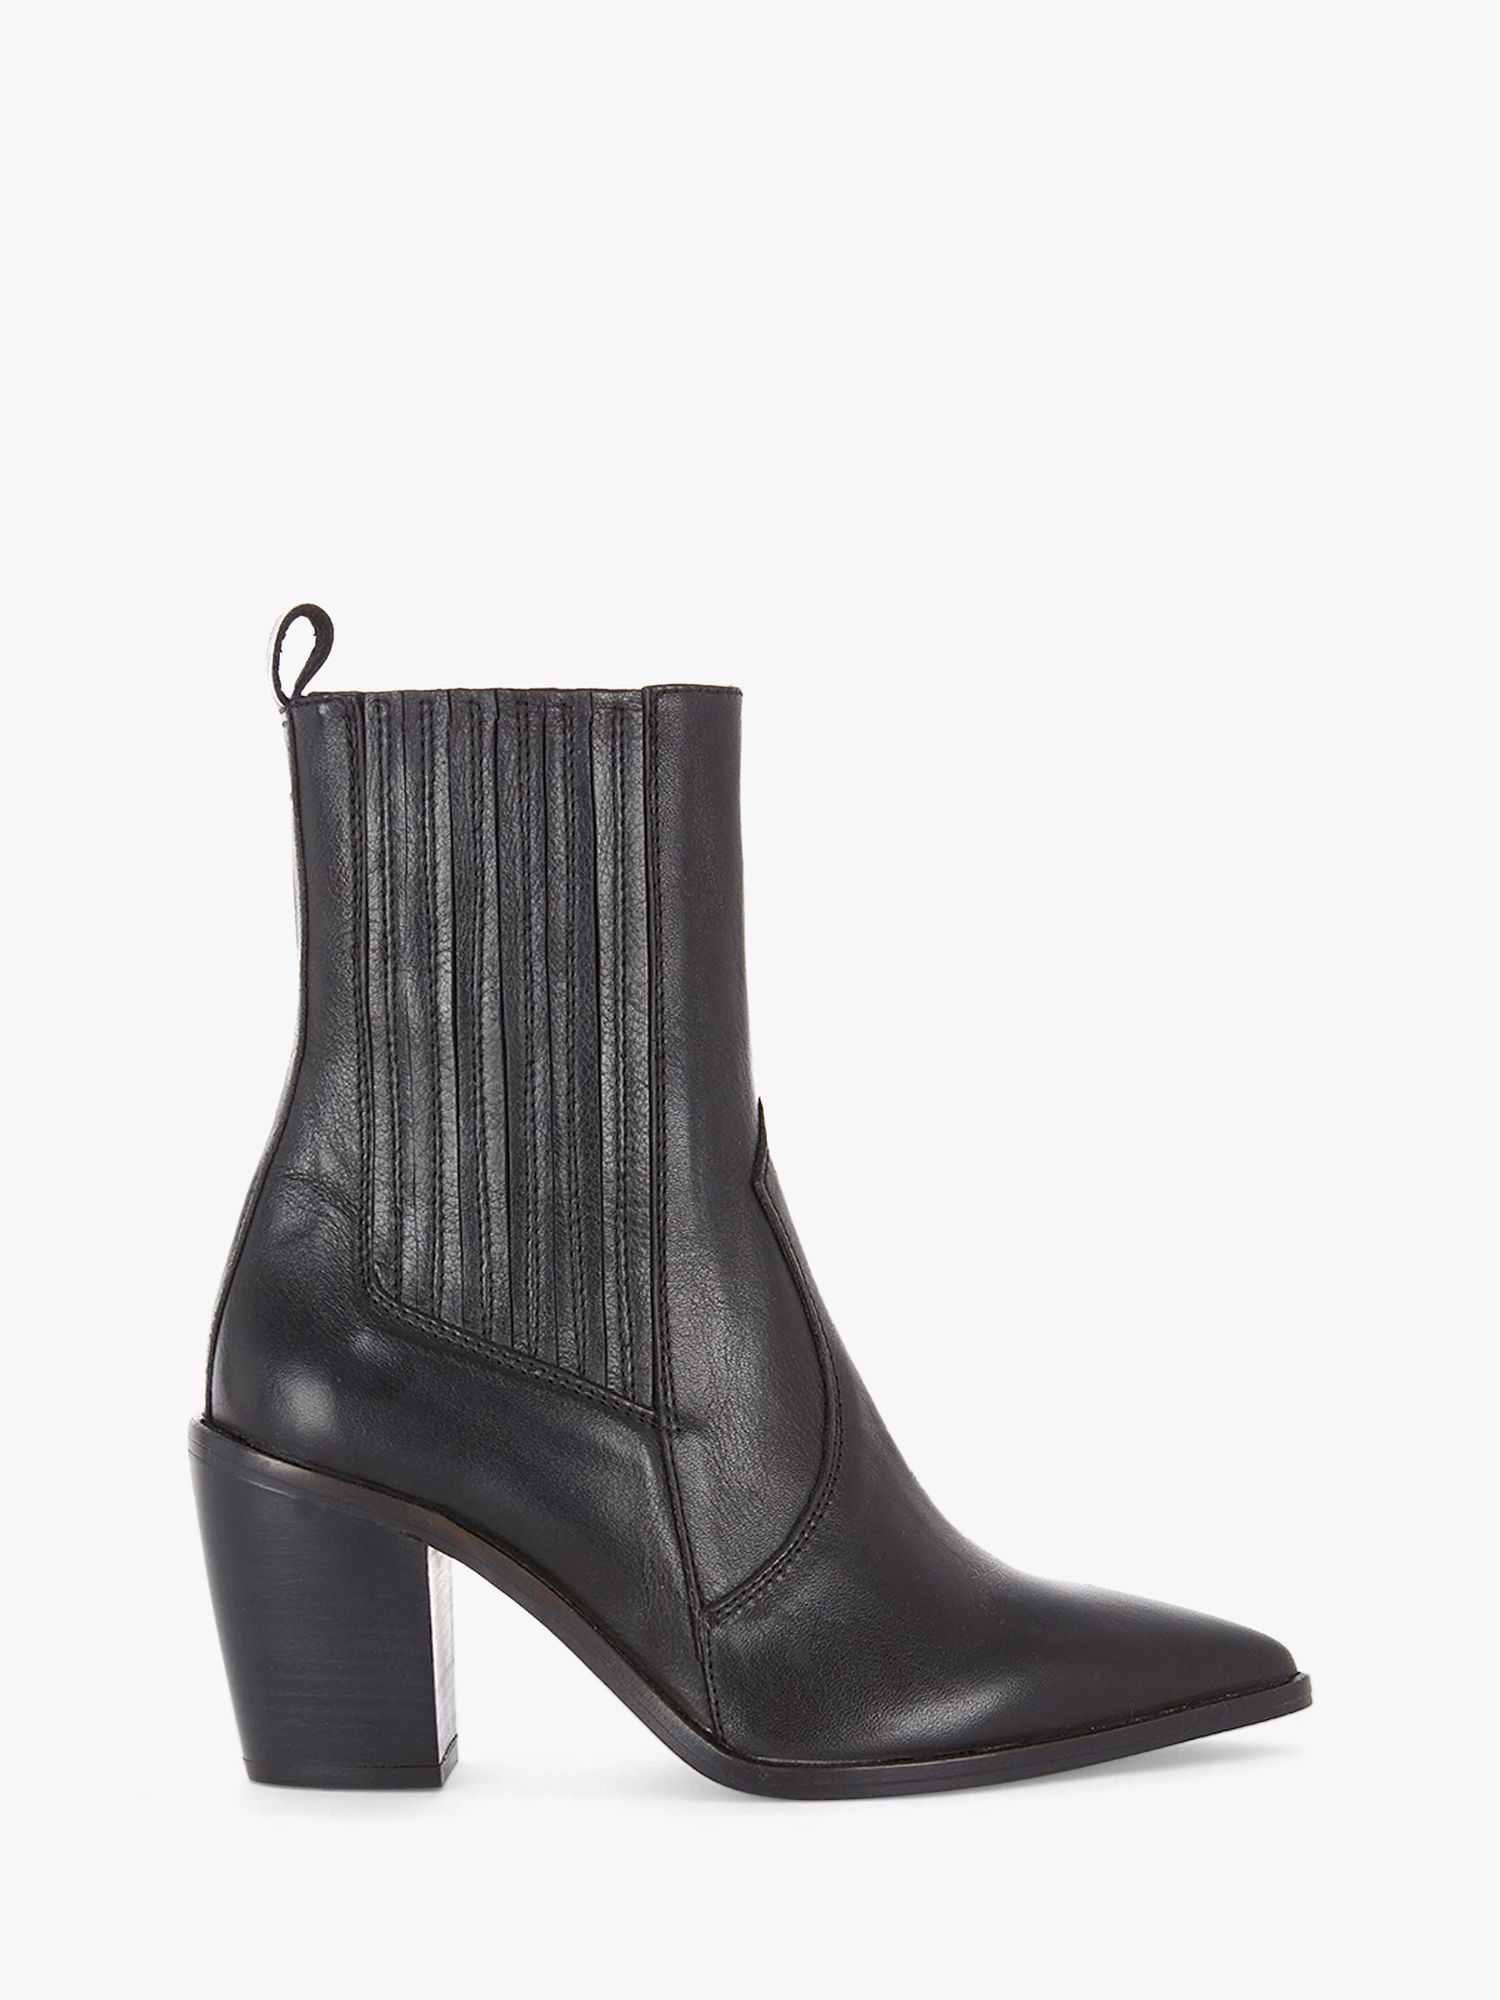 Mint Velvet Willow Mid Calf Leather Boots, Black at John Lewis & Partners